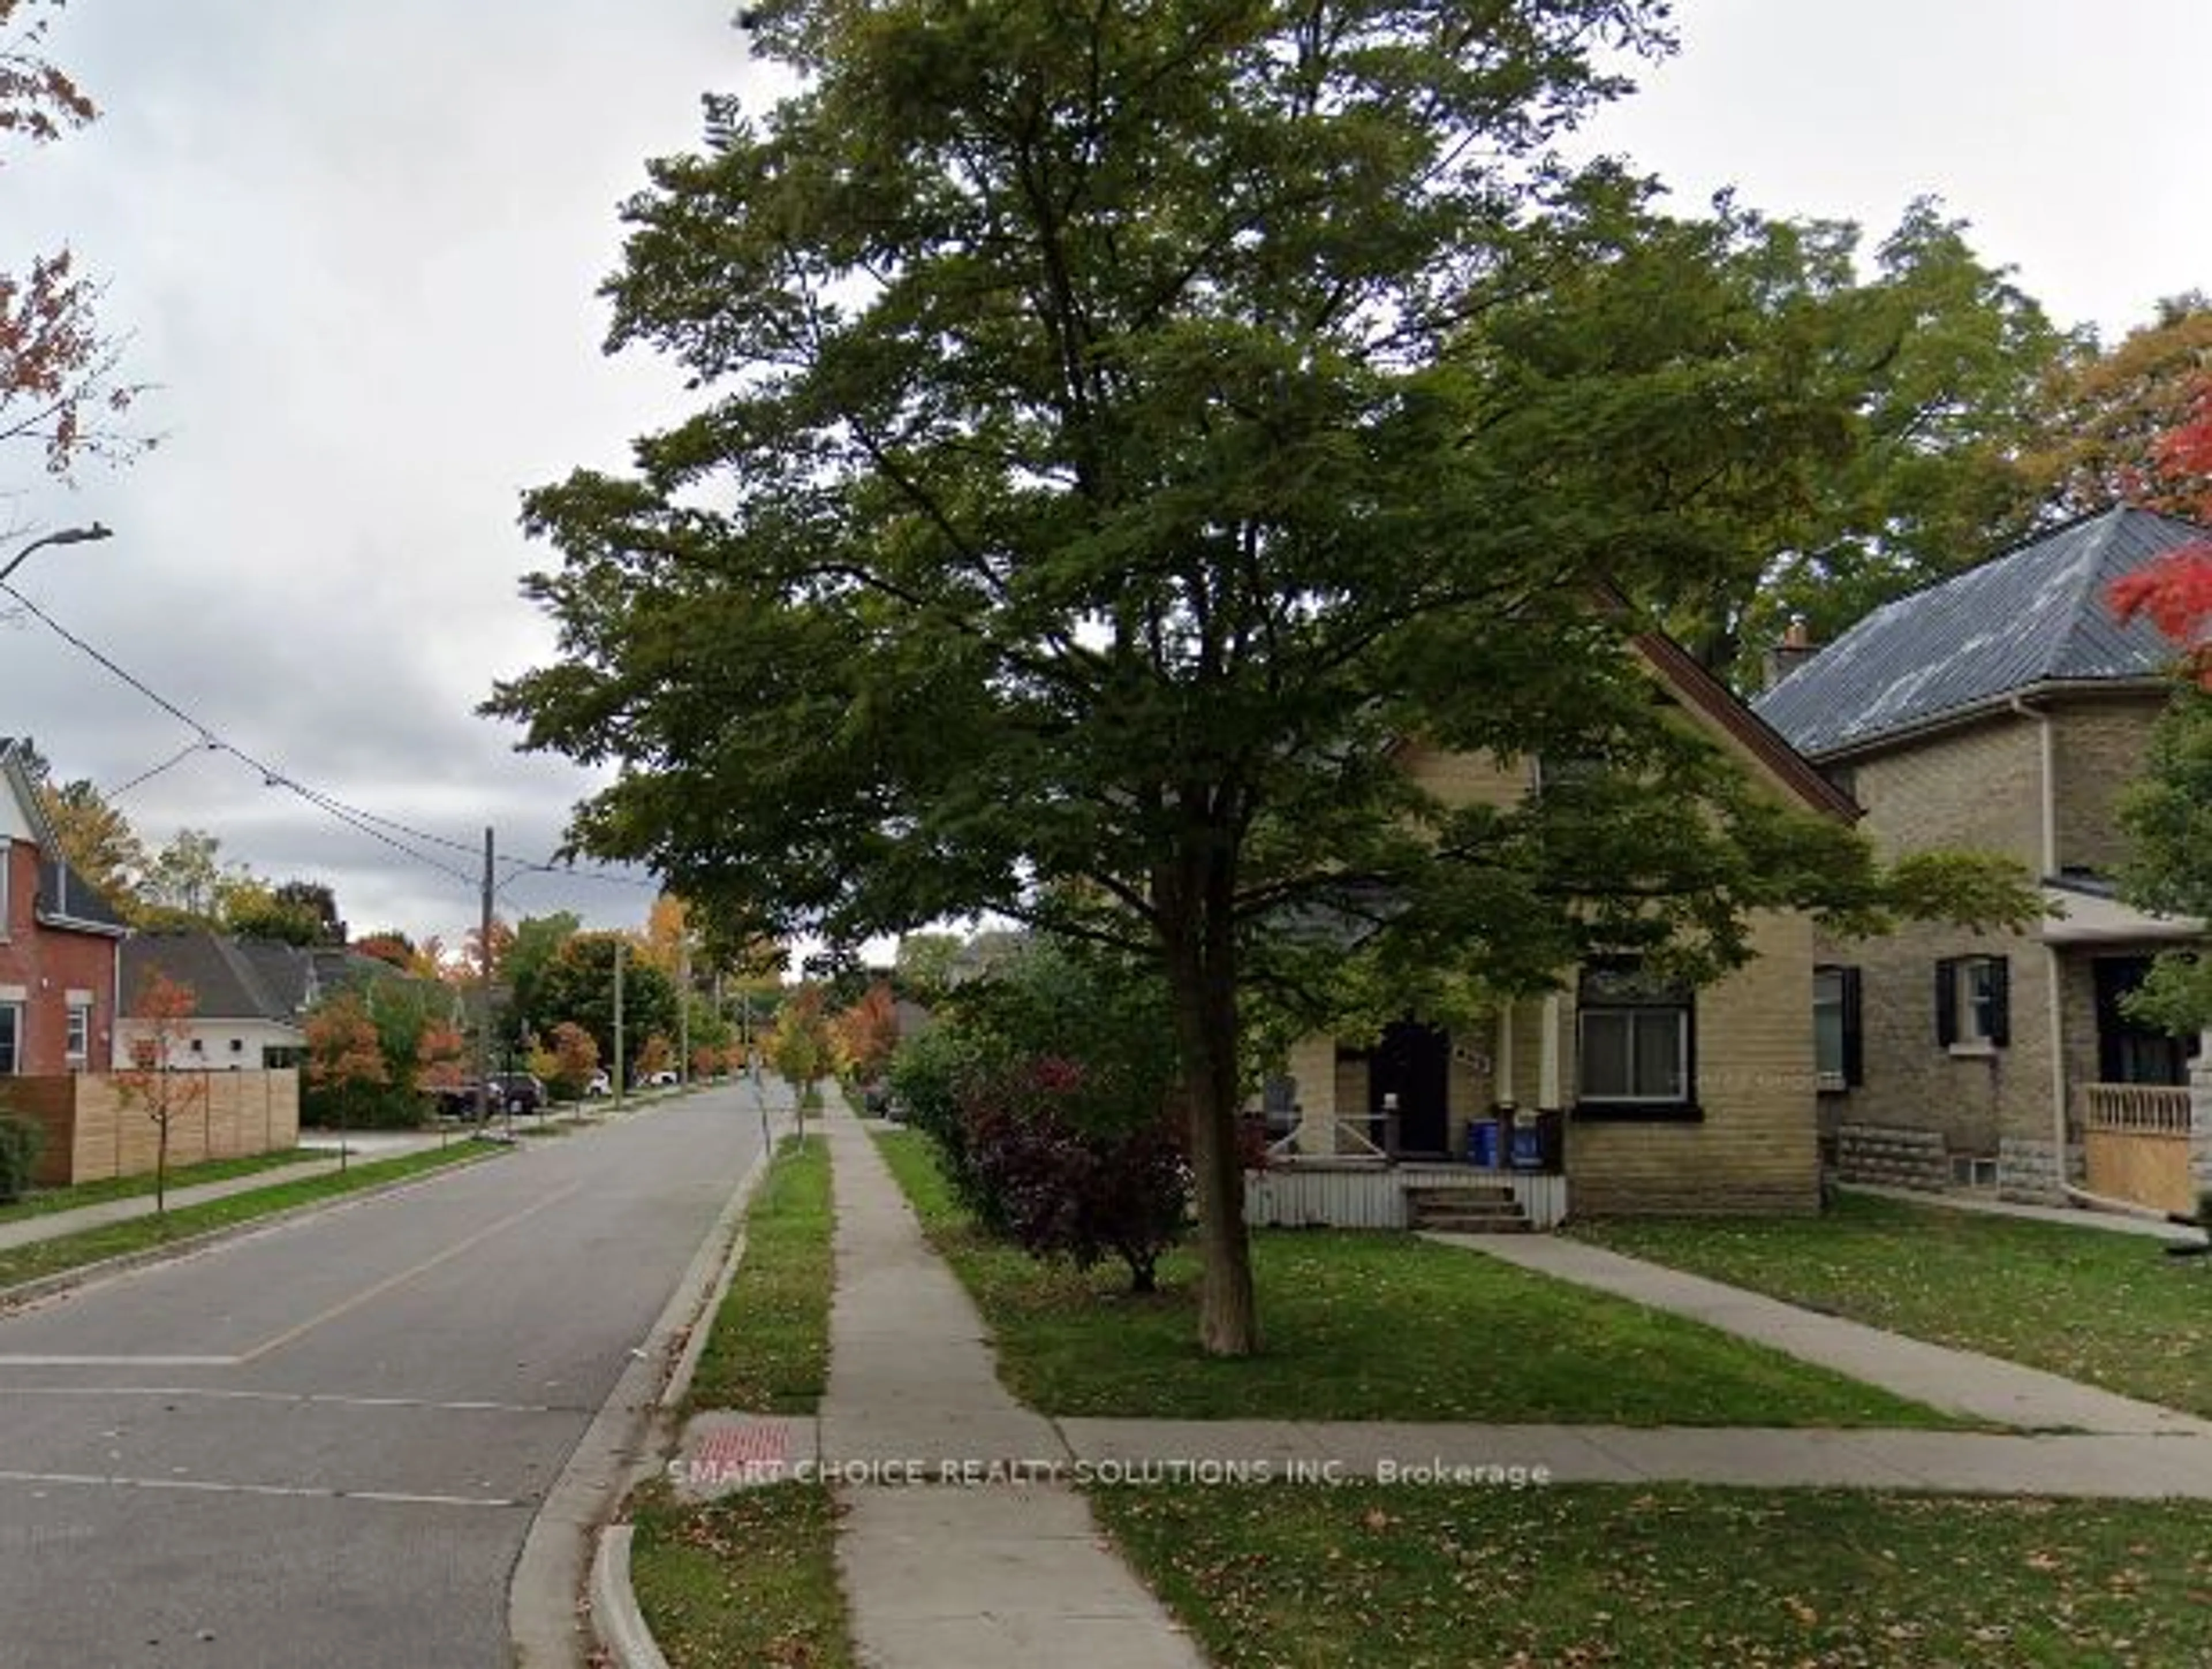 Street view for 865 William St, London Ontario N5Y 2S5